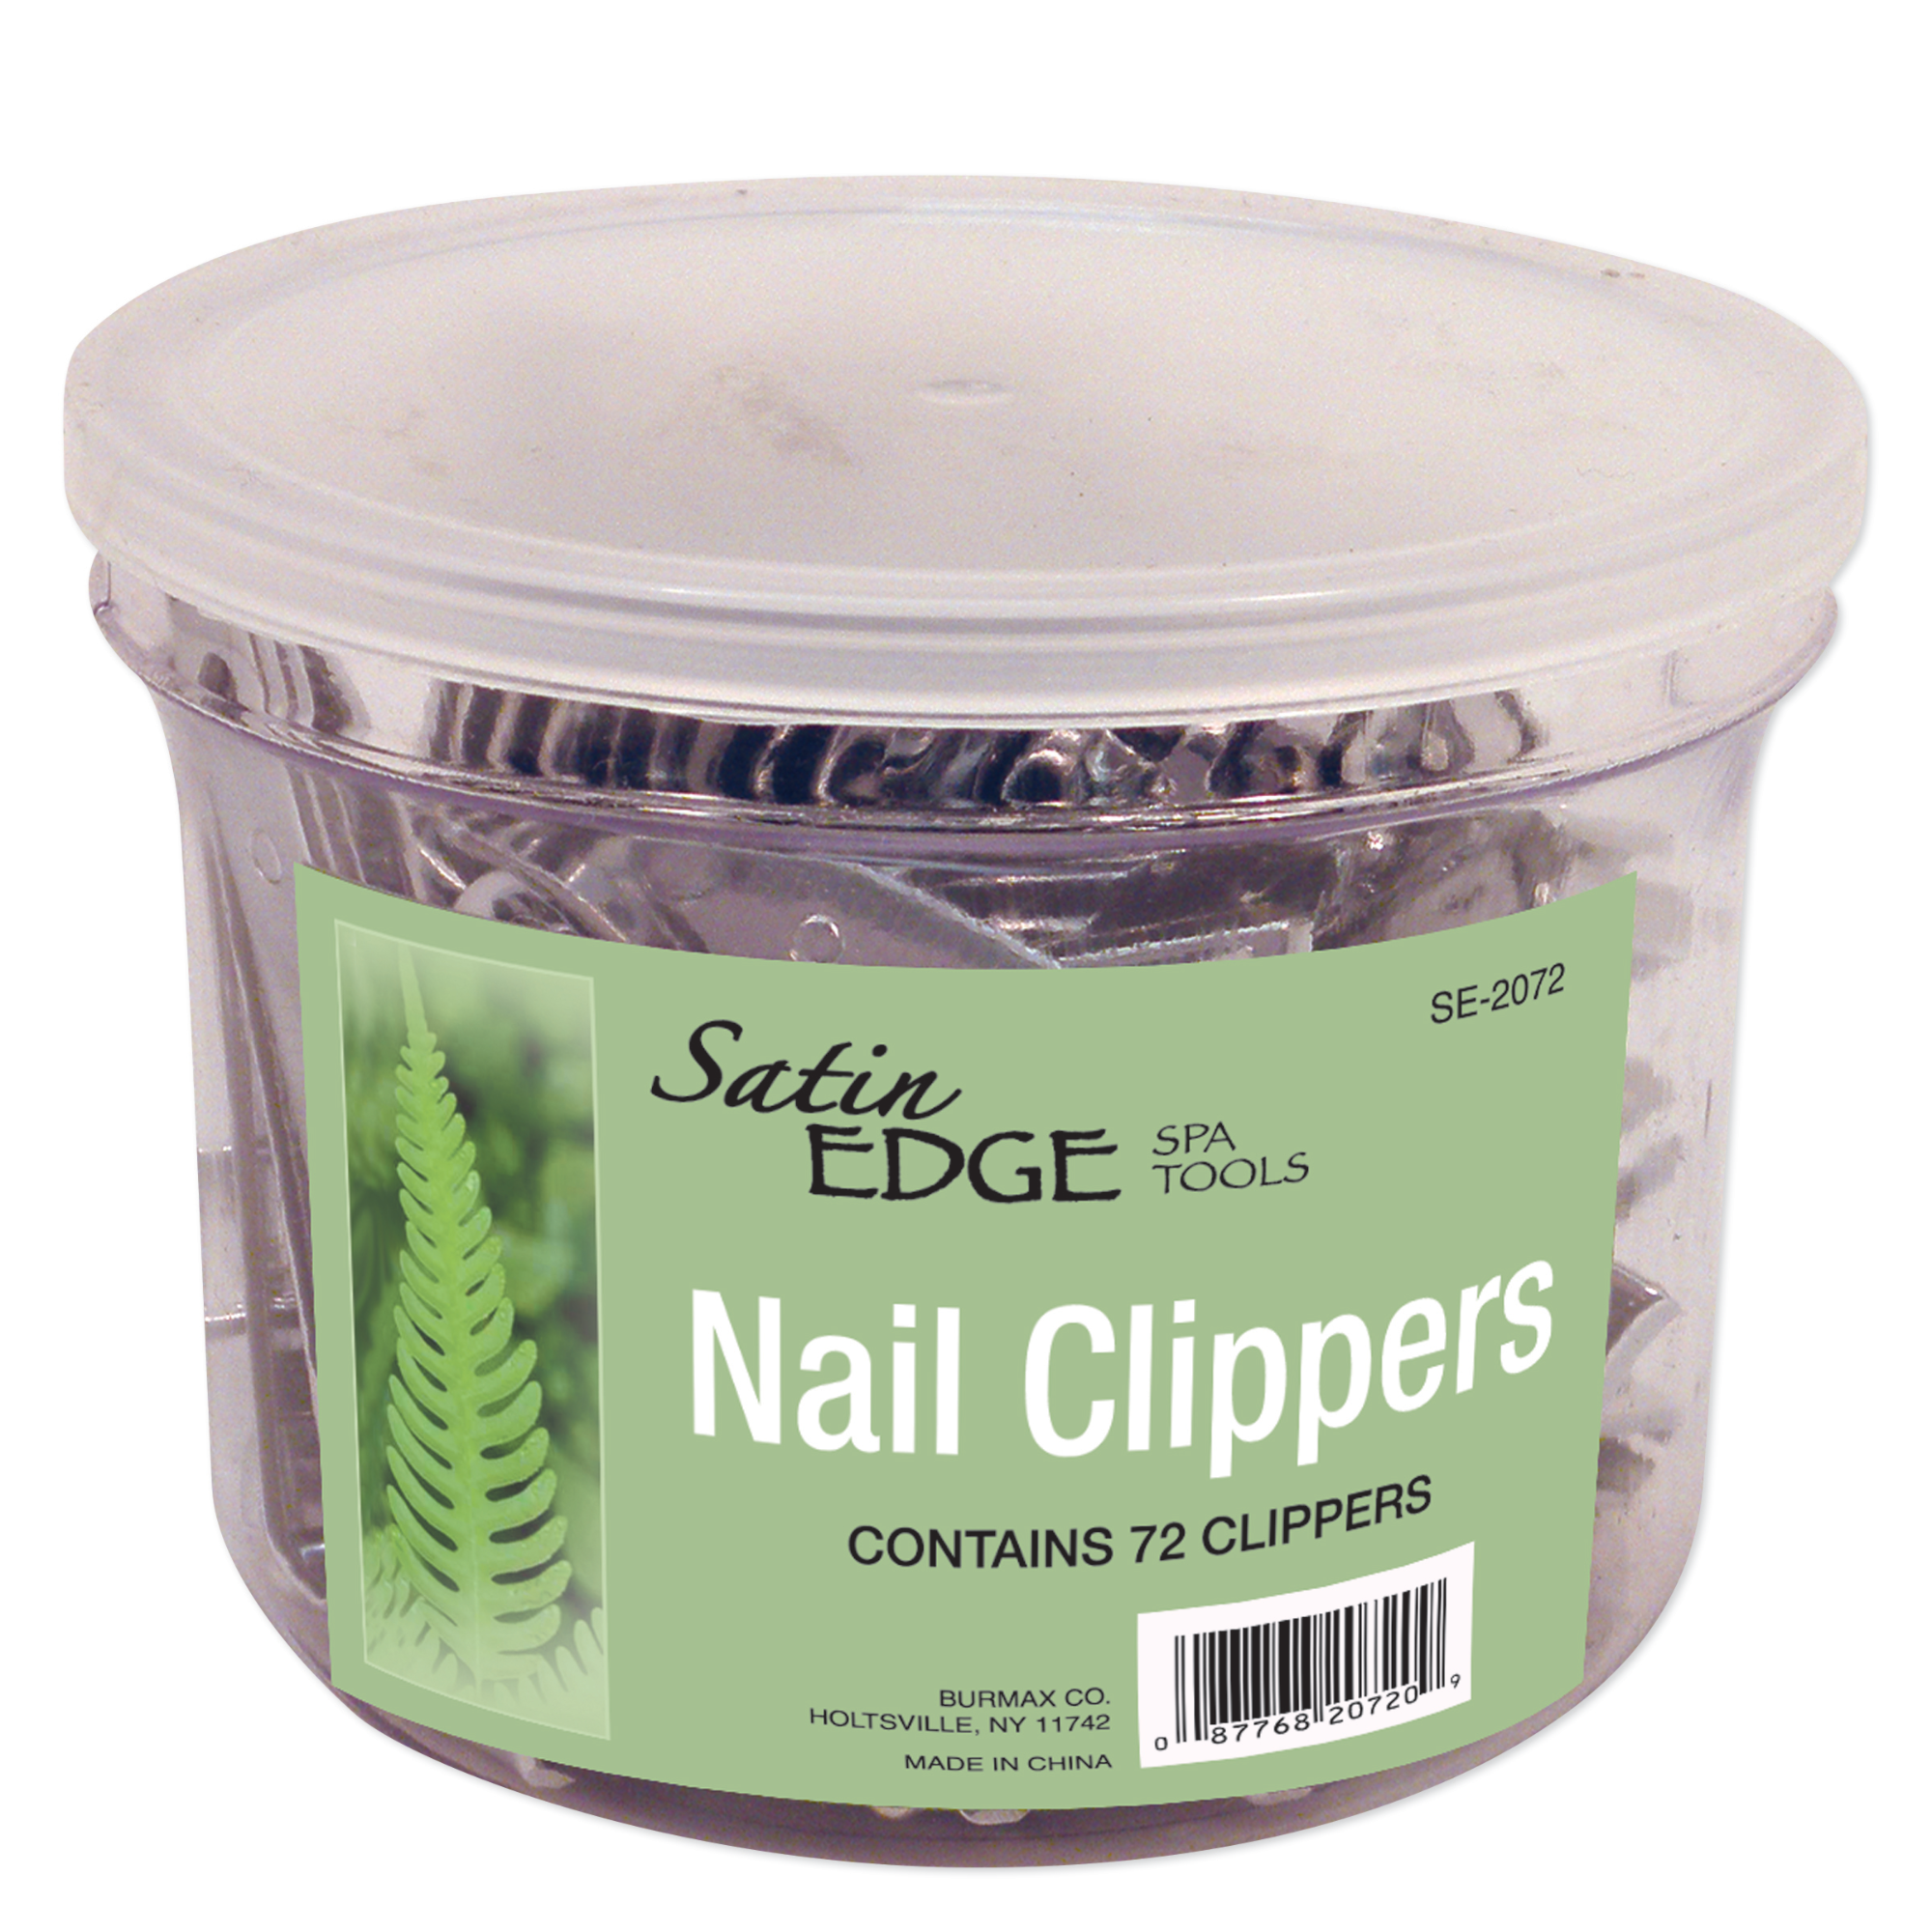 Nail Clippers, Curved Blade - Container of 72